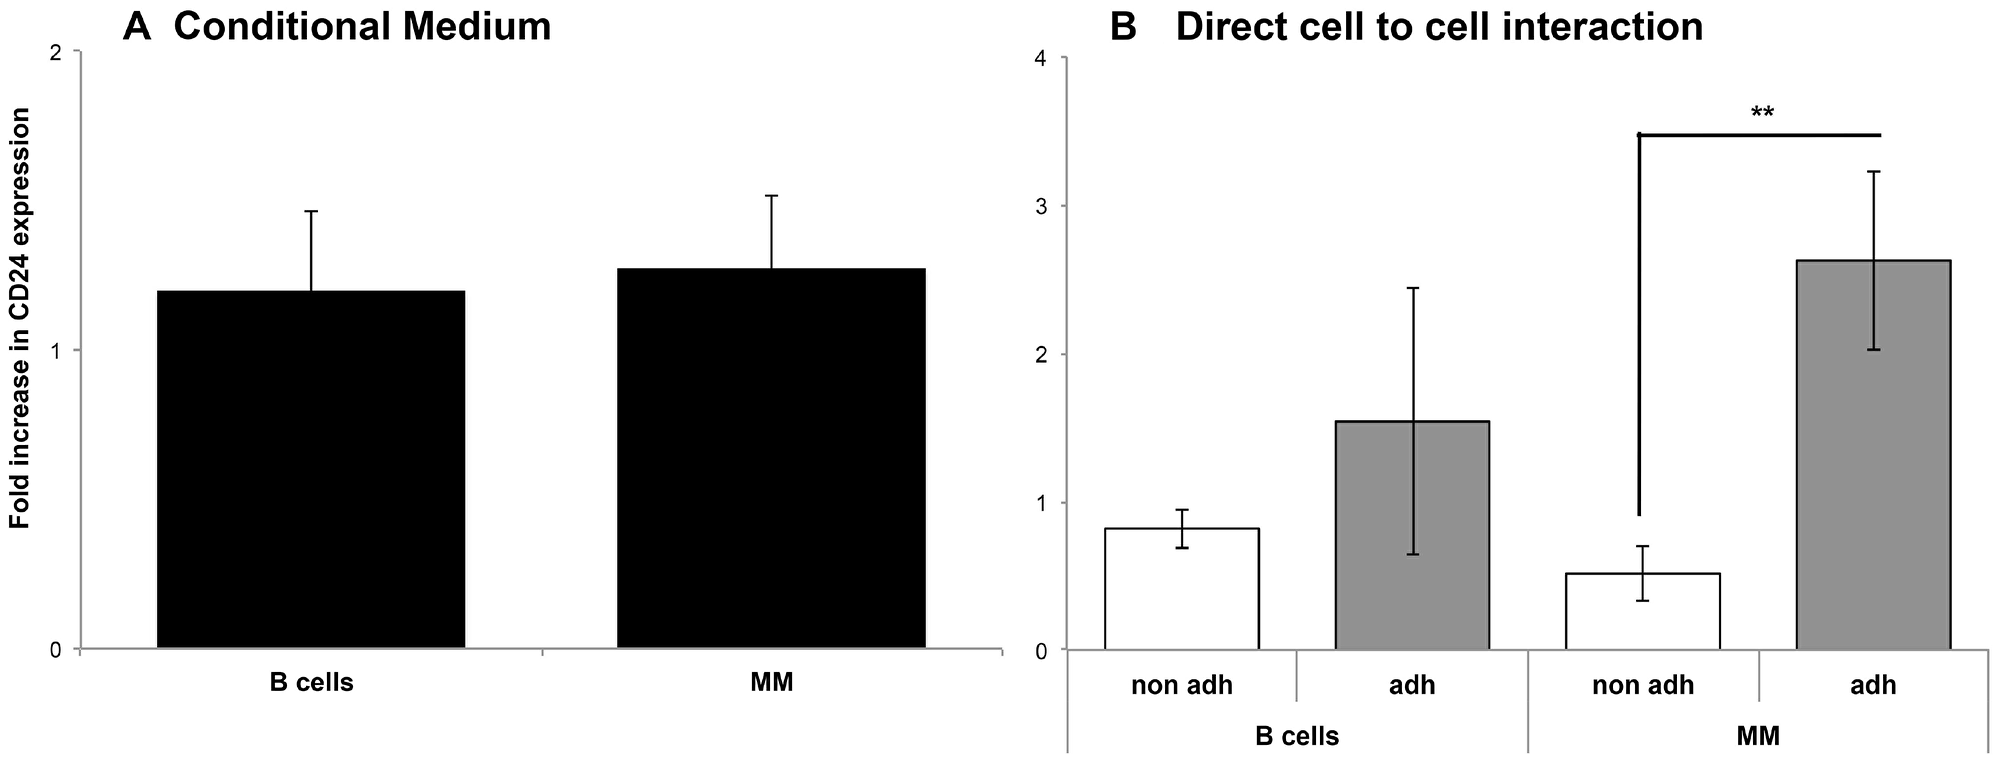 Direct interaction with the BMSC is necessary for CD24 up-regulation in MM and B cells.